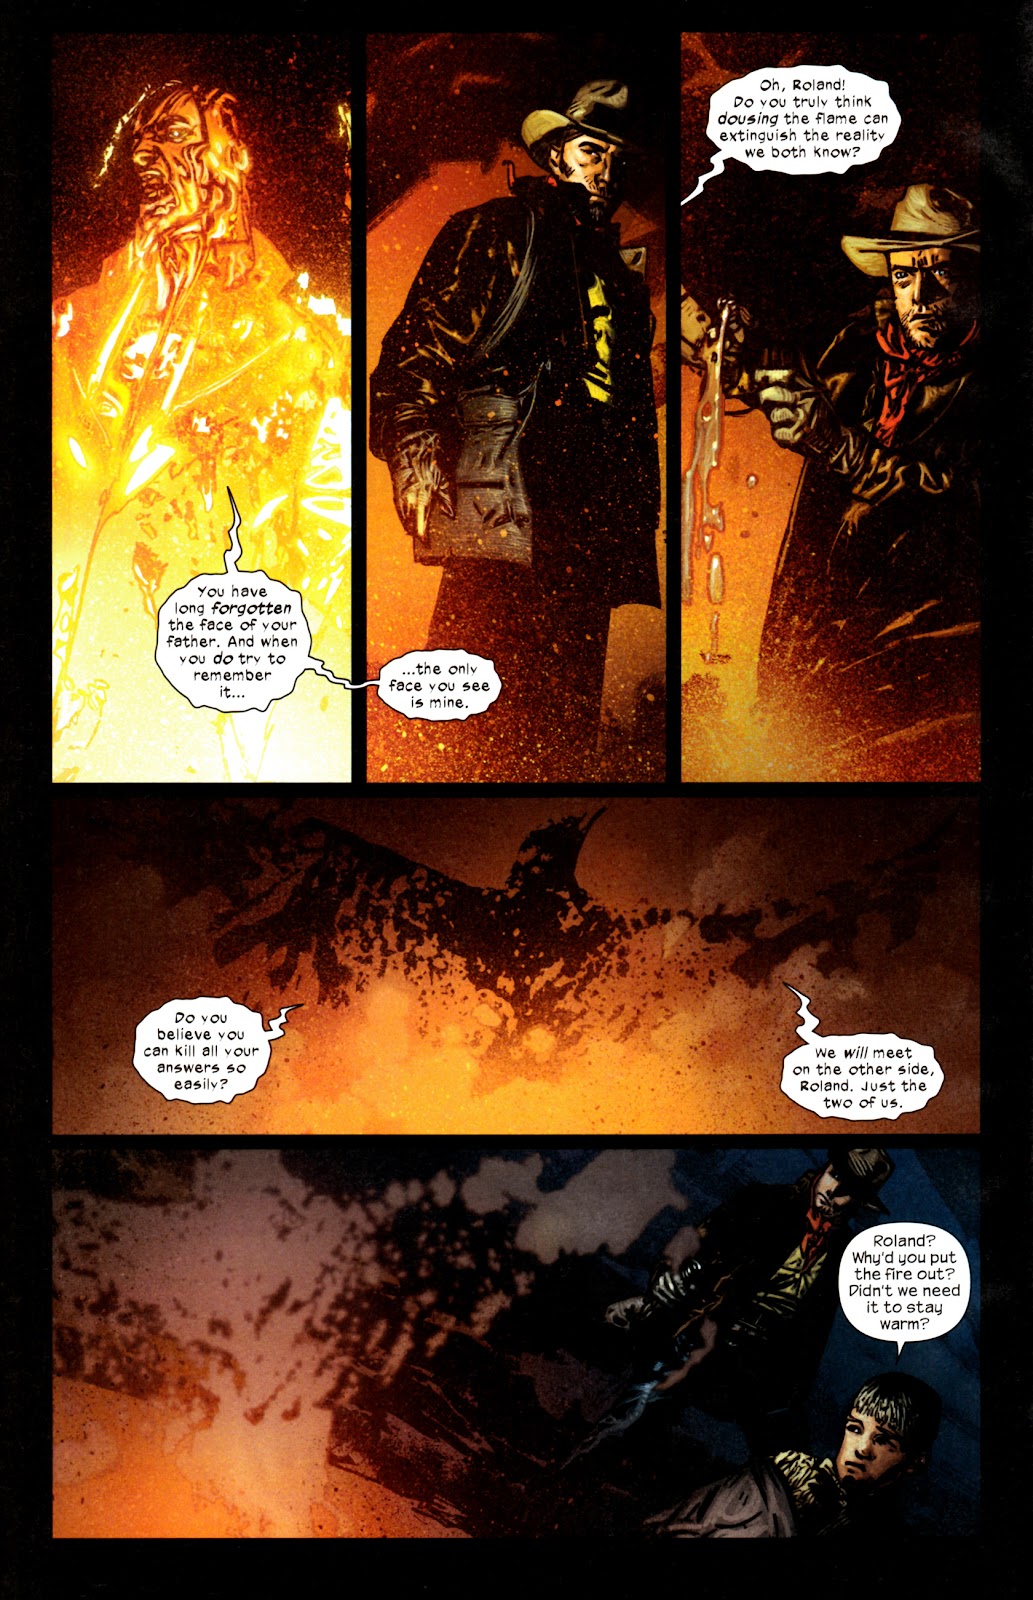 Dark Tower: The Gunslinger - The Man in Black issue 1 - Page 8